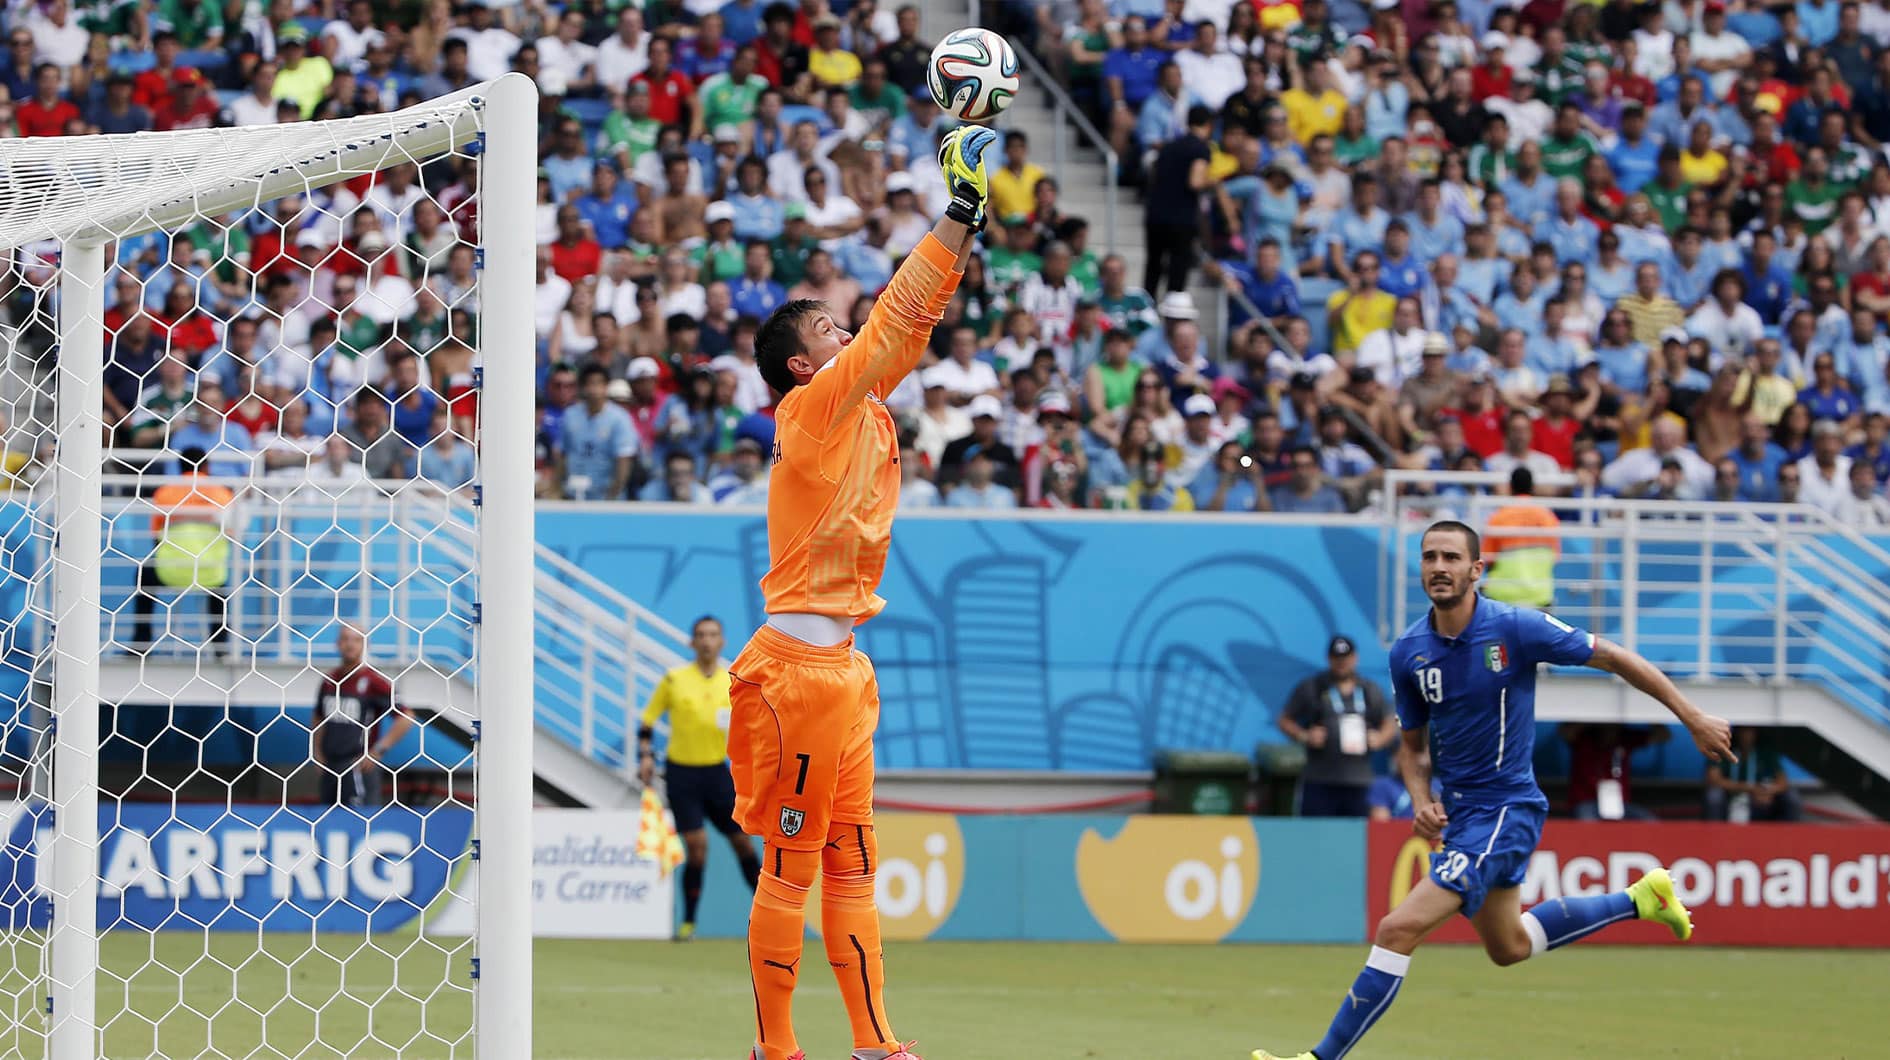 Uruguay goalkeeper Fernando Muslera (1) punches the ball clear of Italy defender Leonardo Bonucci (19) during the first half of a 2014 World Cup game at Estadio das Dunas.